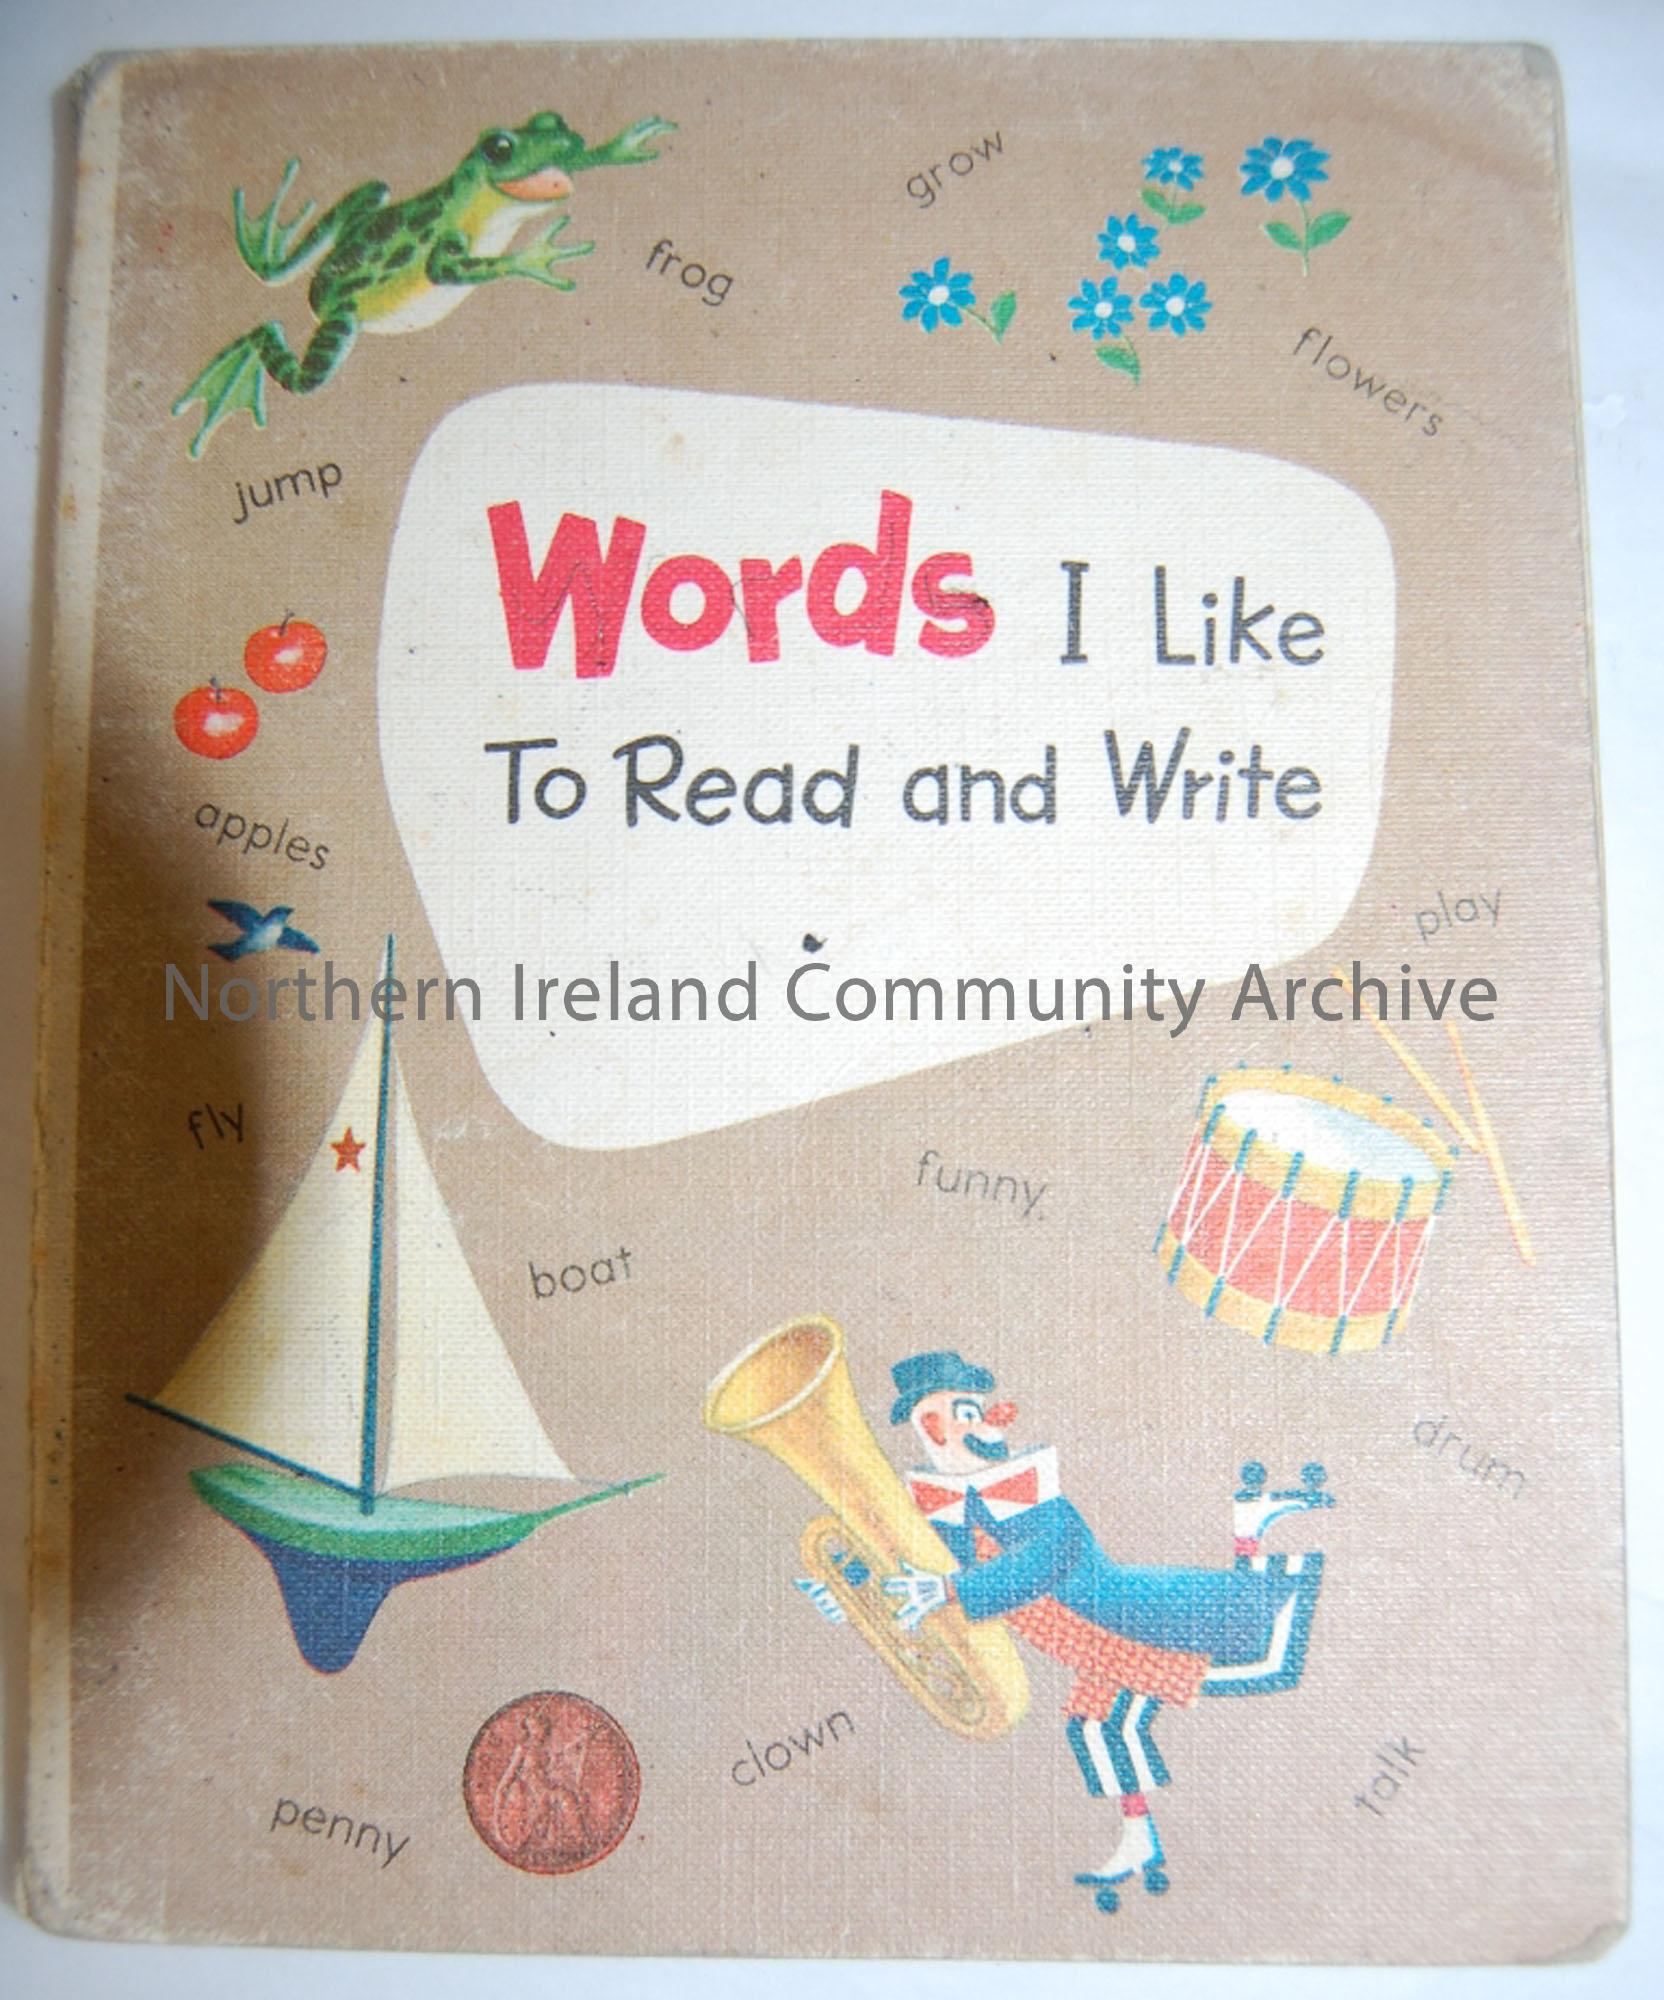 By O’Donnell, Townes and Munro, published by Nisbet & Co. Ltd, 1968. Brown cover with ilustrations of clown, yacht, frog etc.